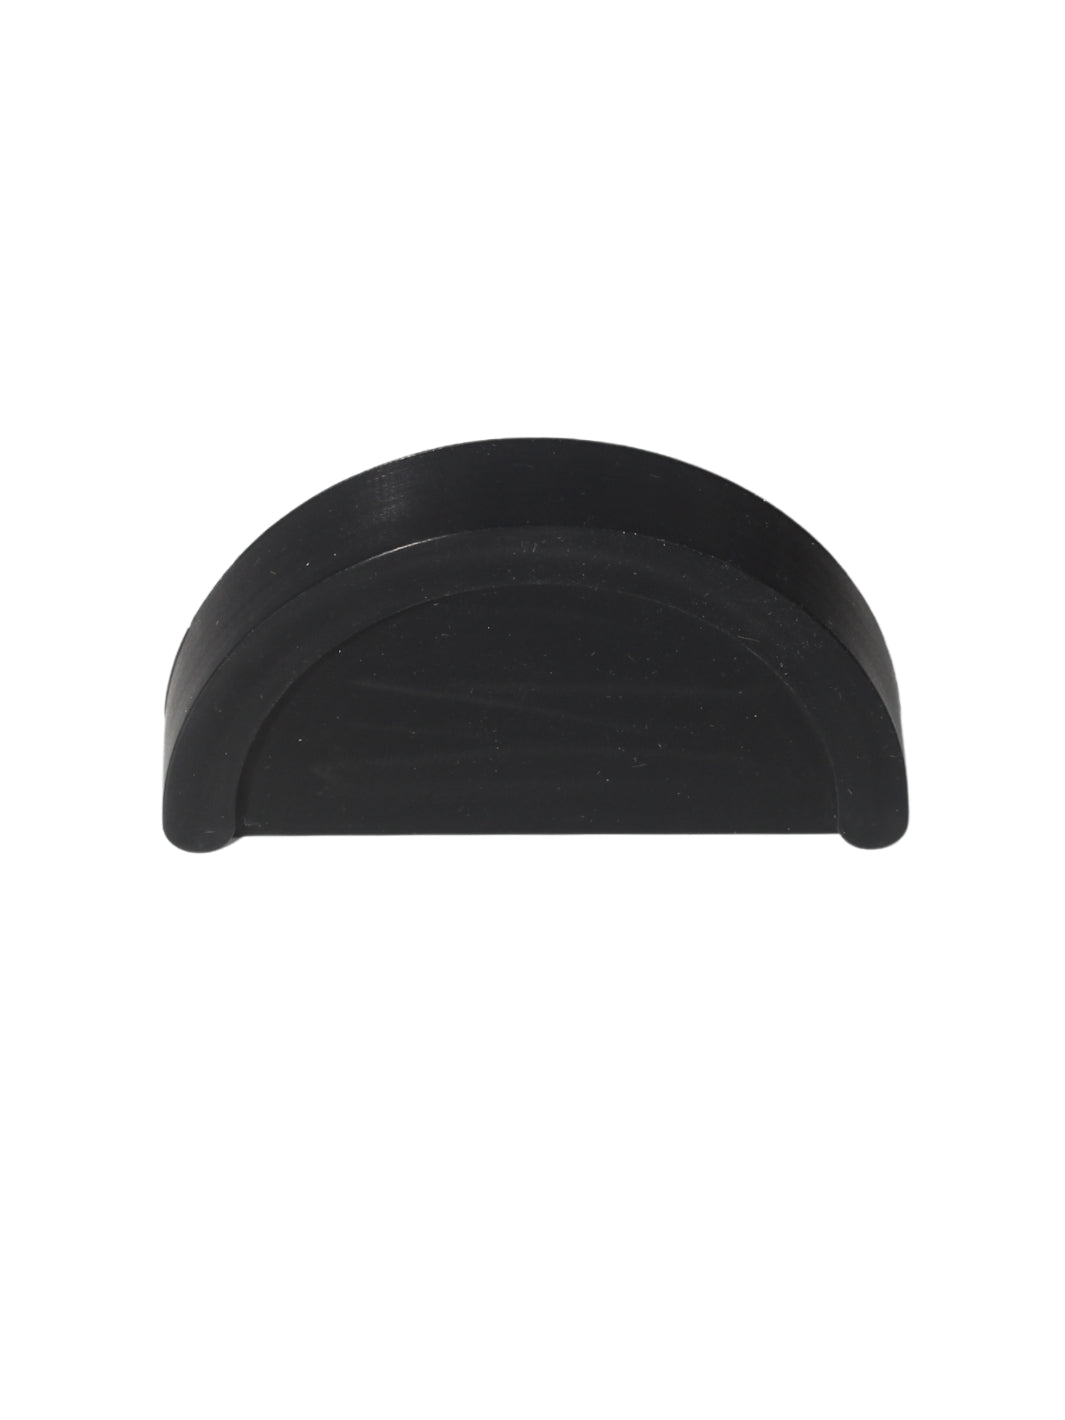 SAINT ANTHONY INDUSTRIES The Bloc Knockbox Replacement Rubber Cover